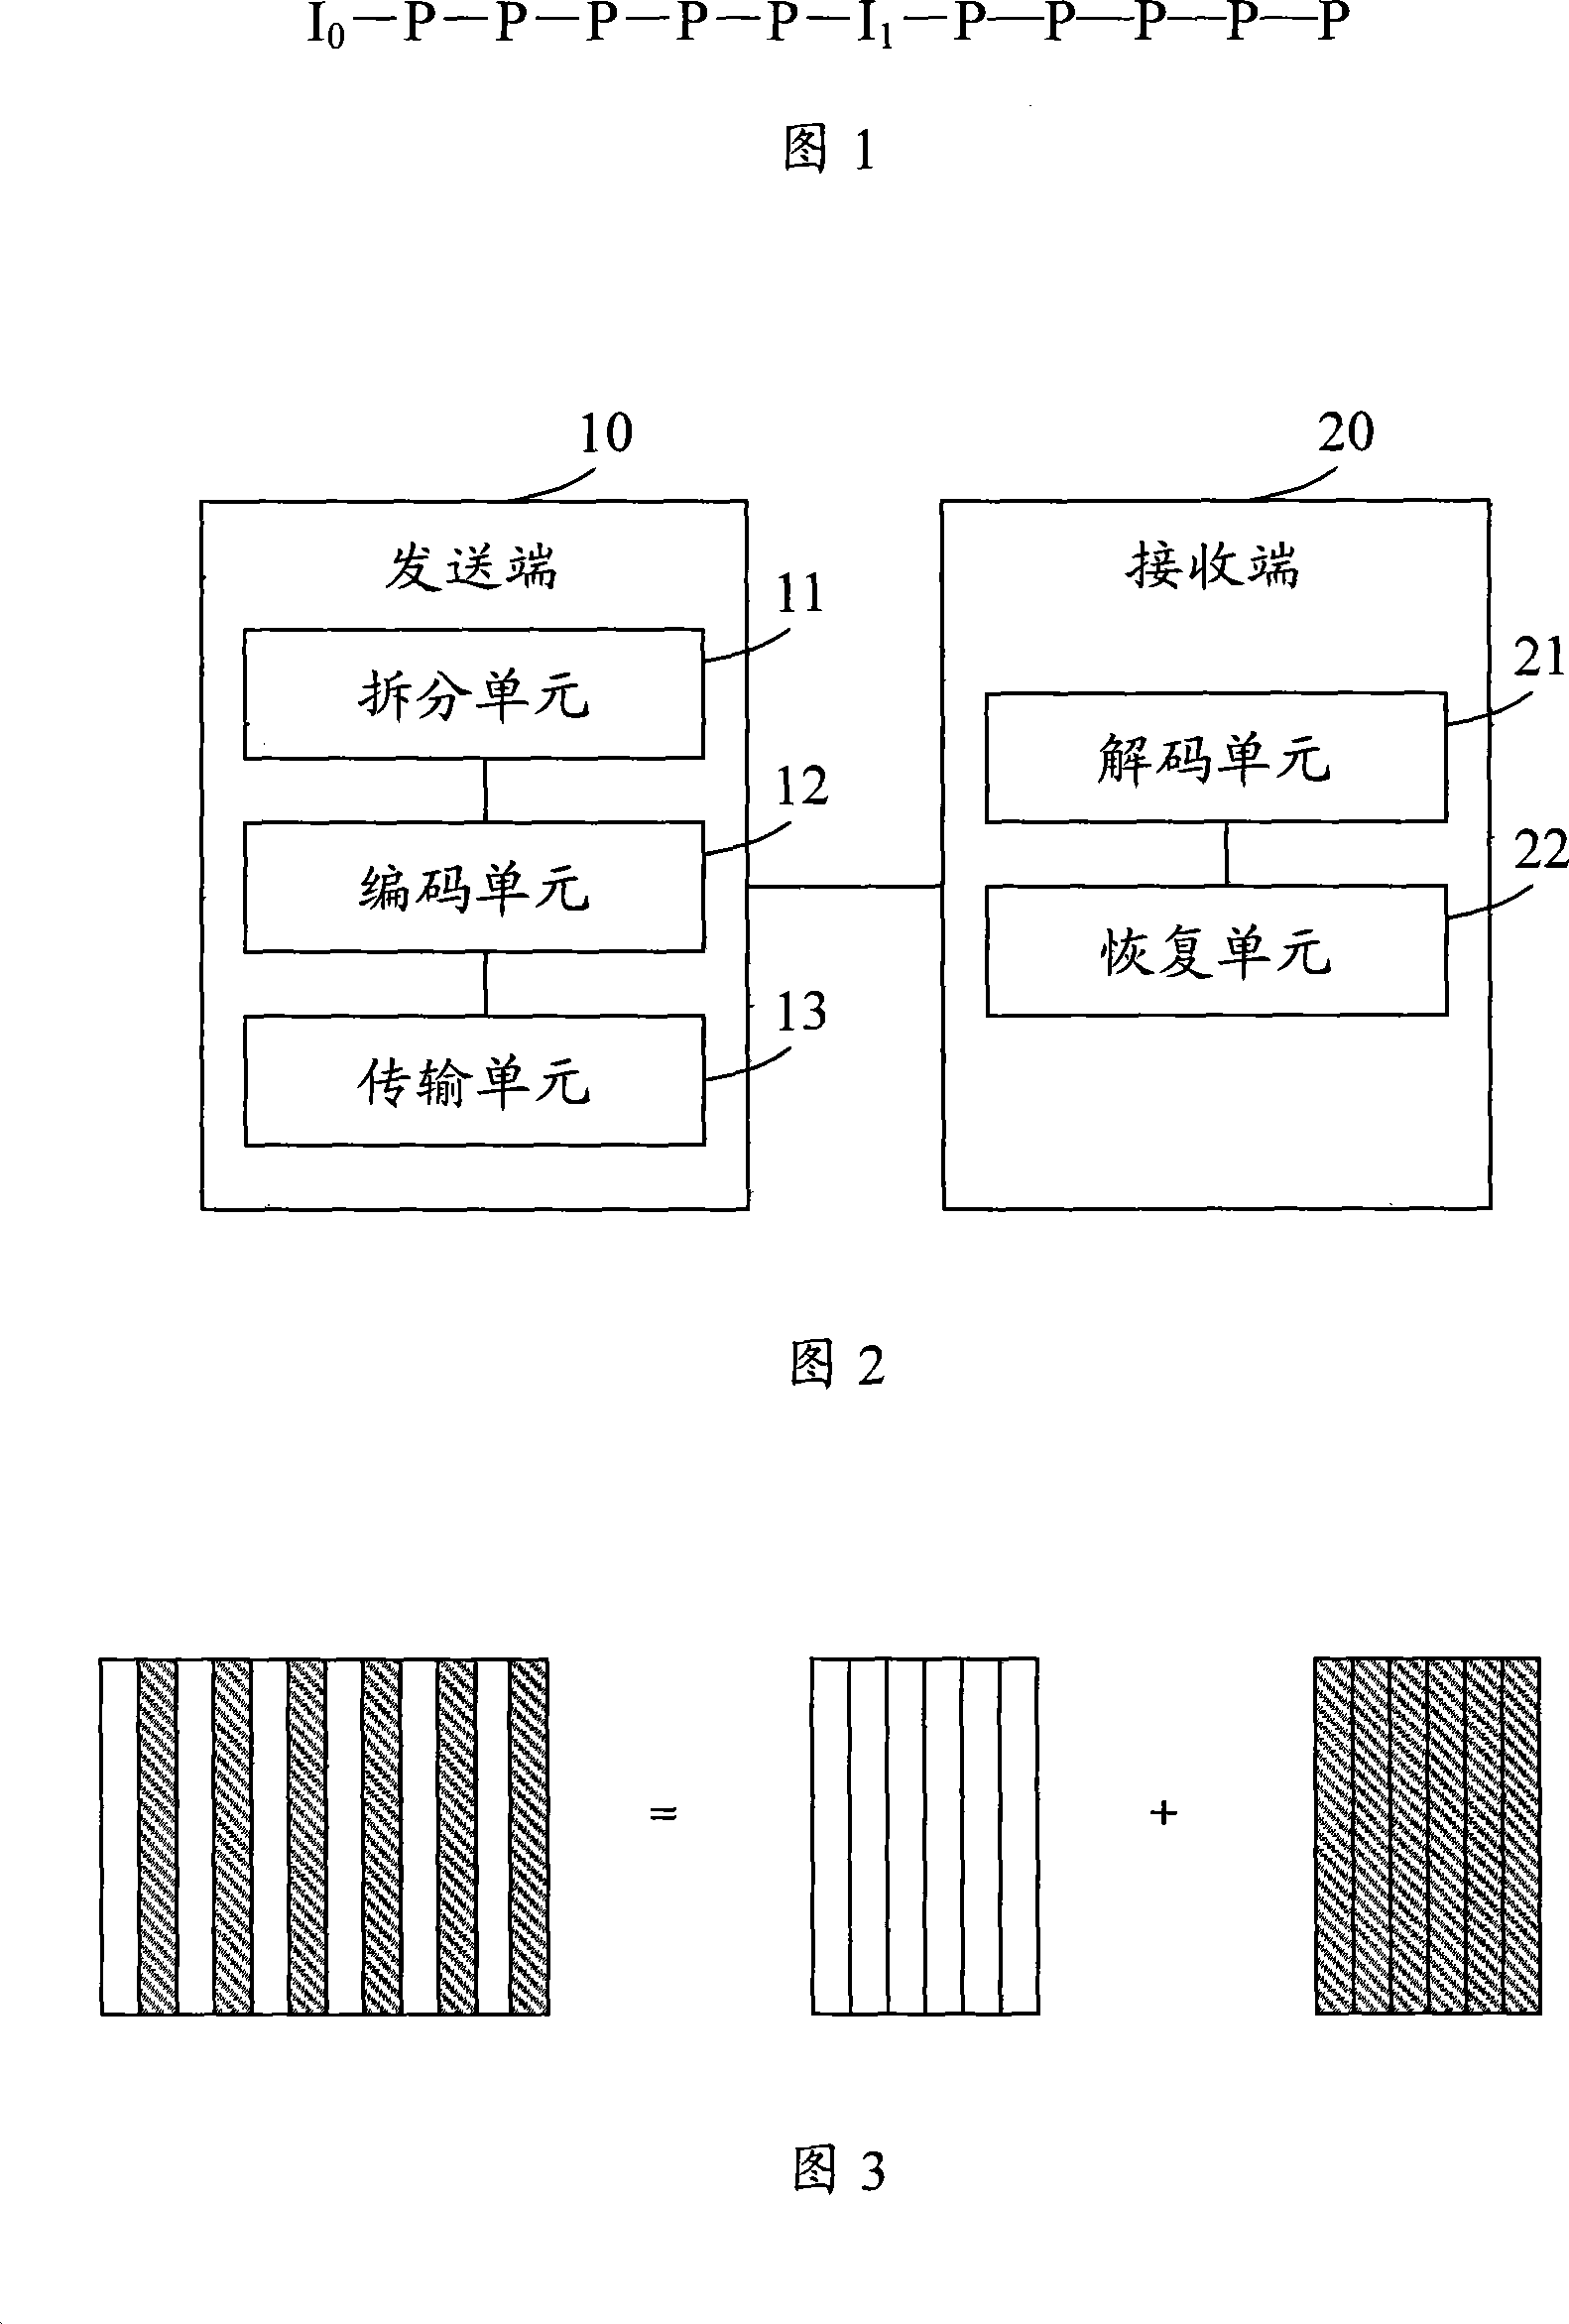 A video error tolerance control system and method